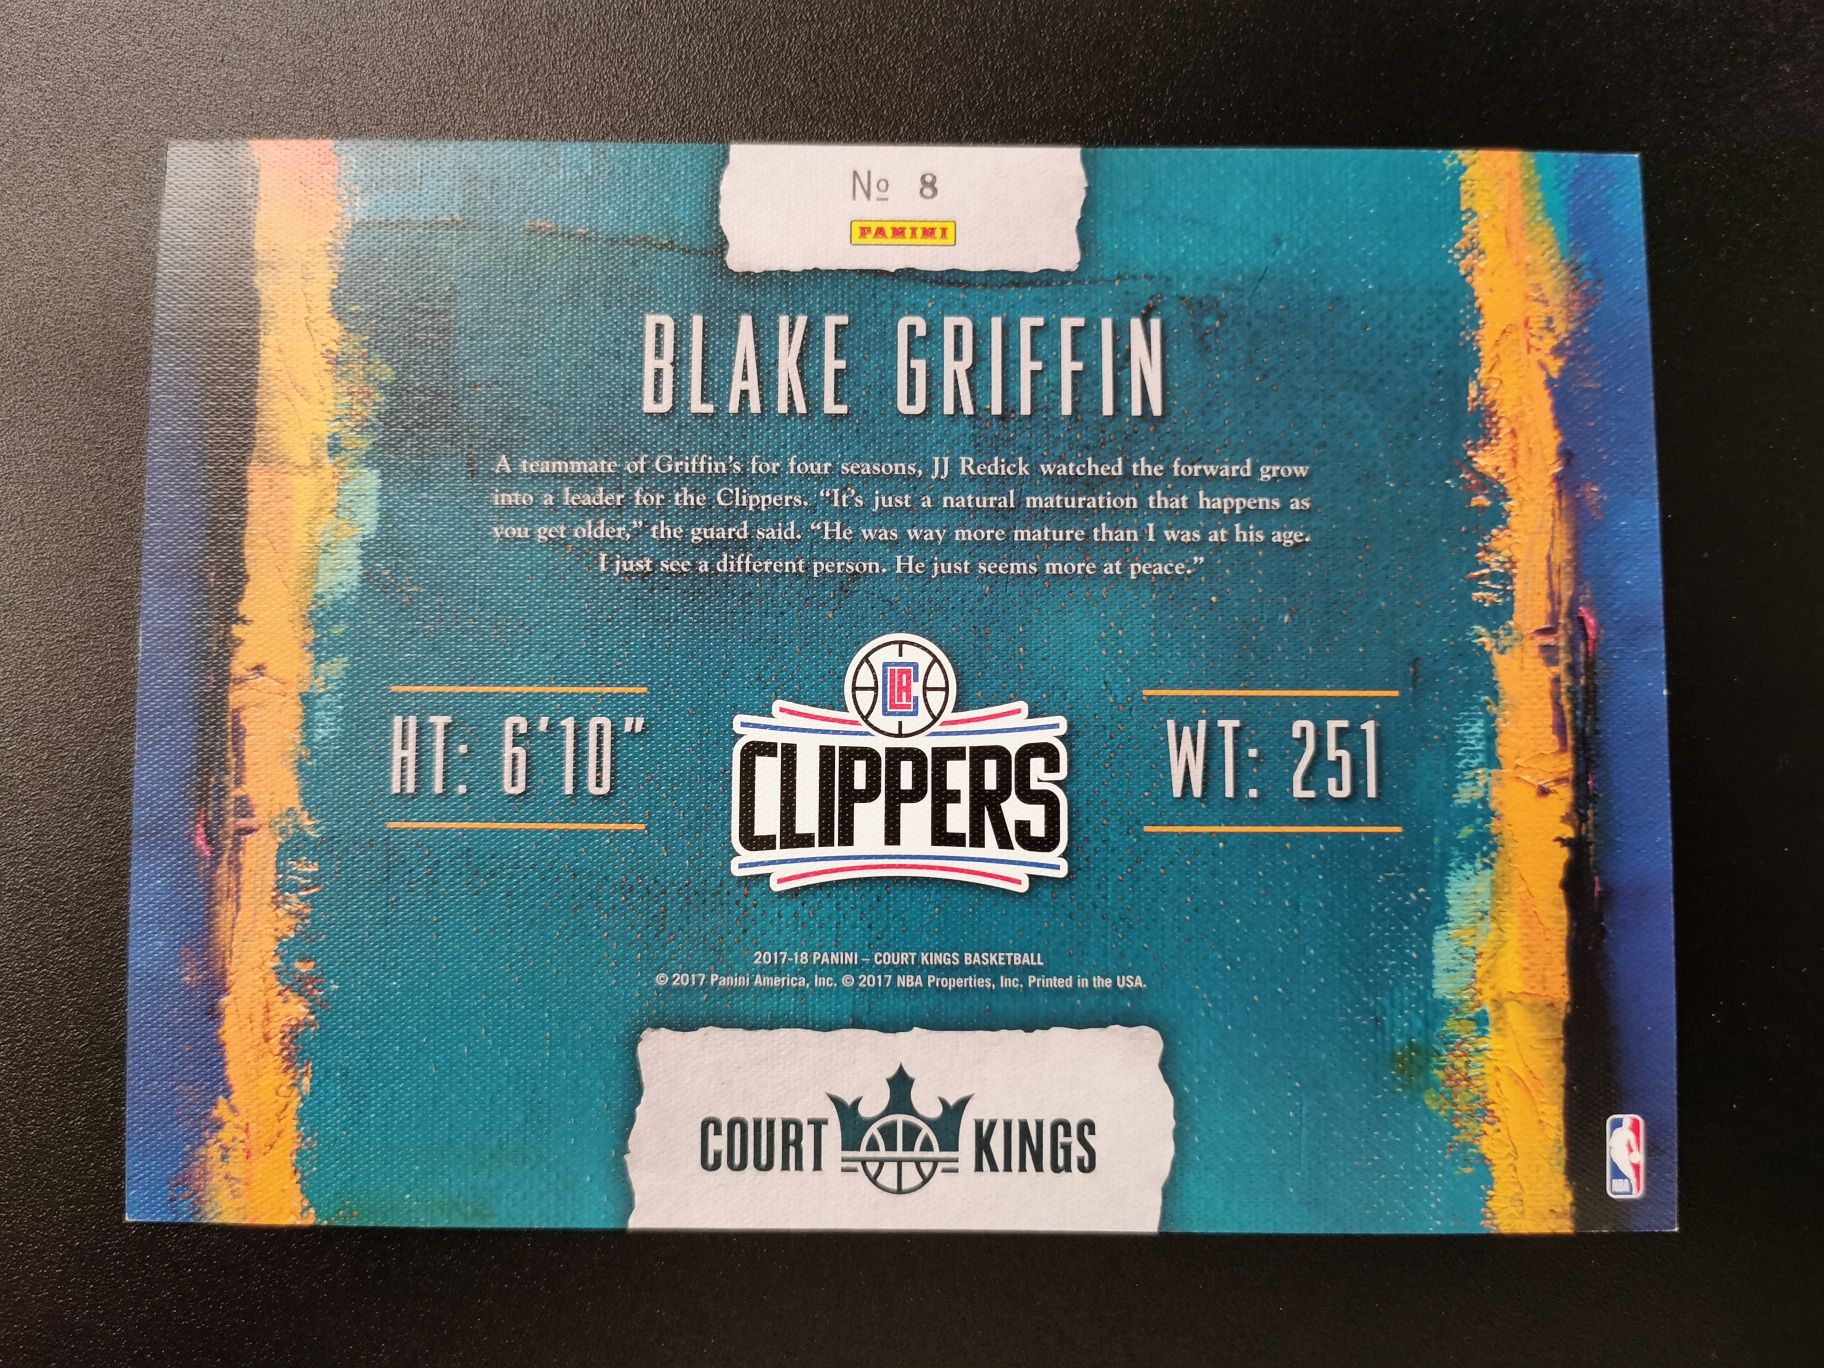 Karta NBA. Blake Griffin - Los Angeles Clippers.